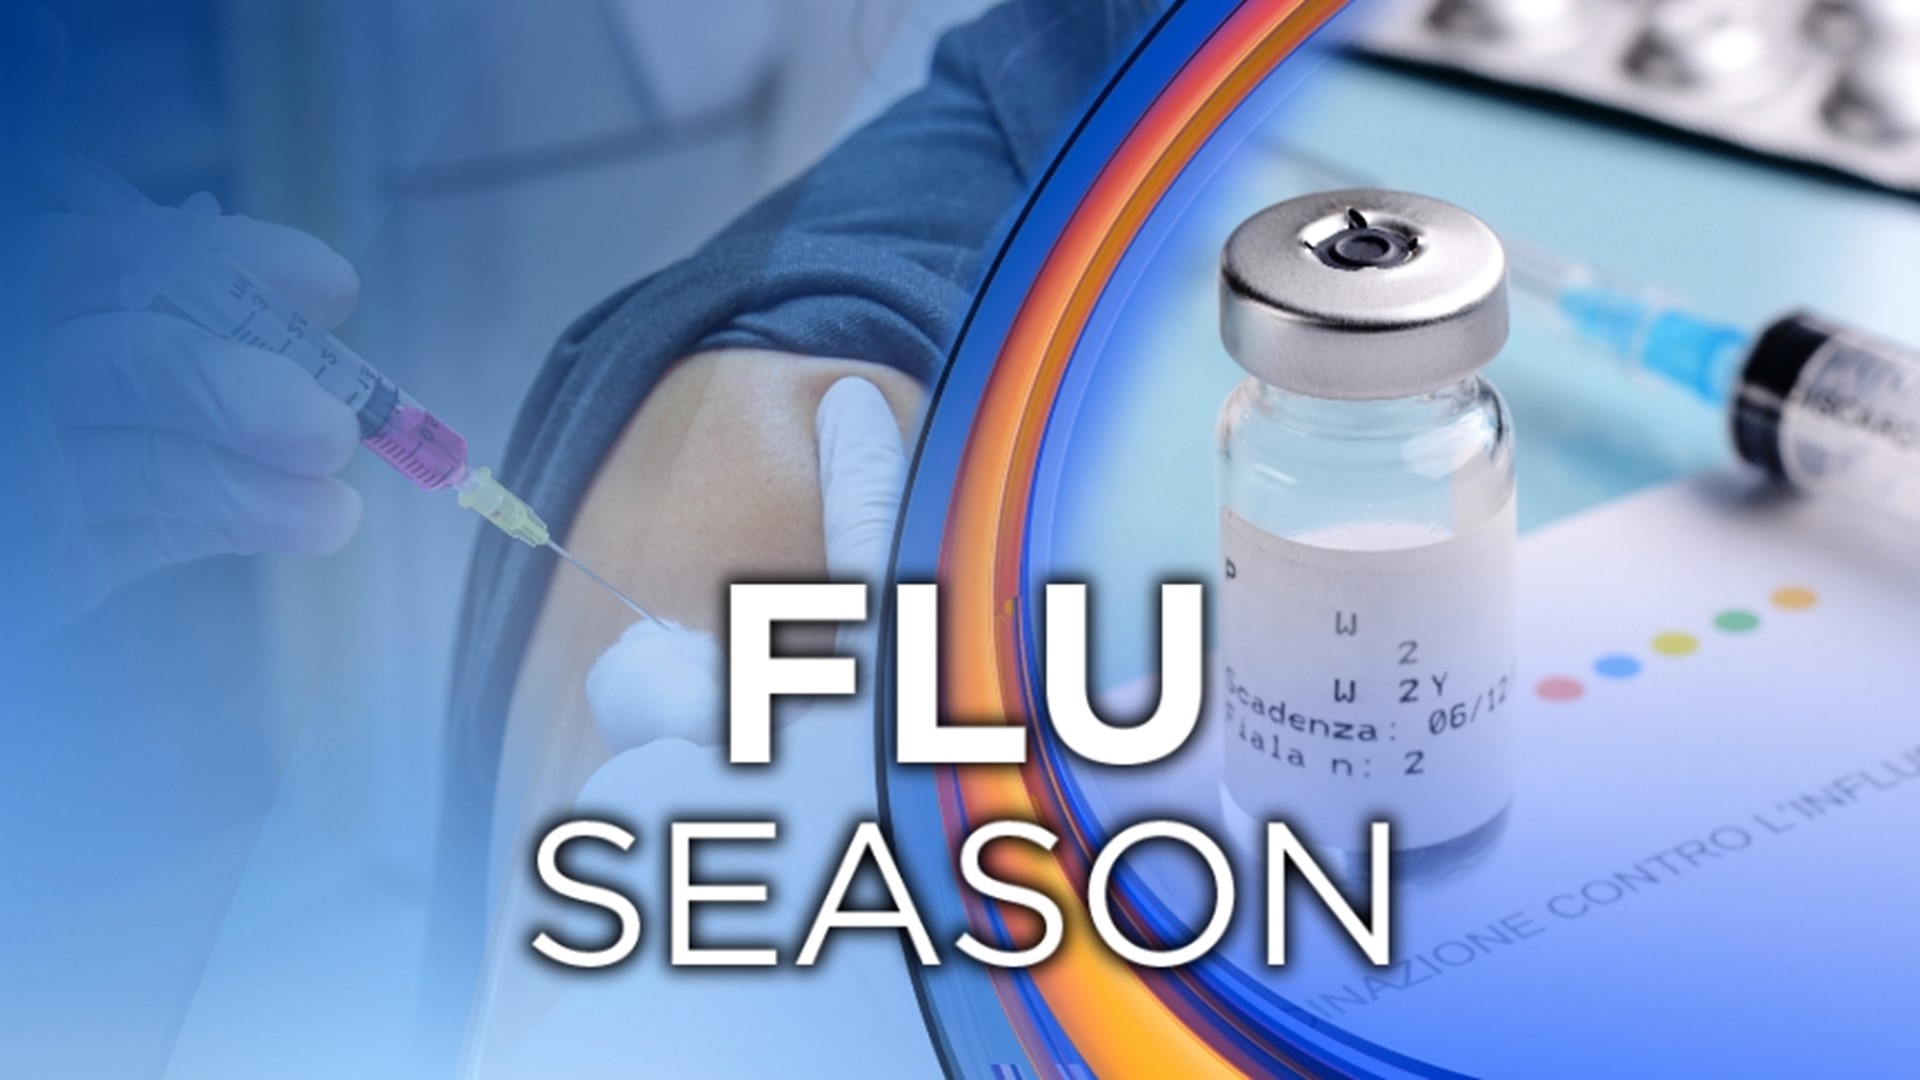 So far this flu season, there have been 72,000 cases statewide.